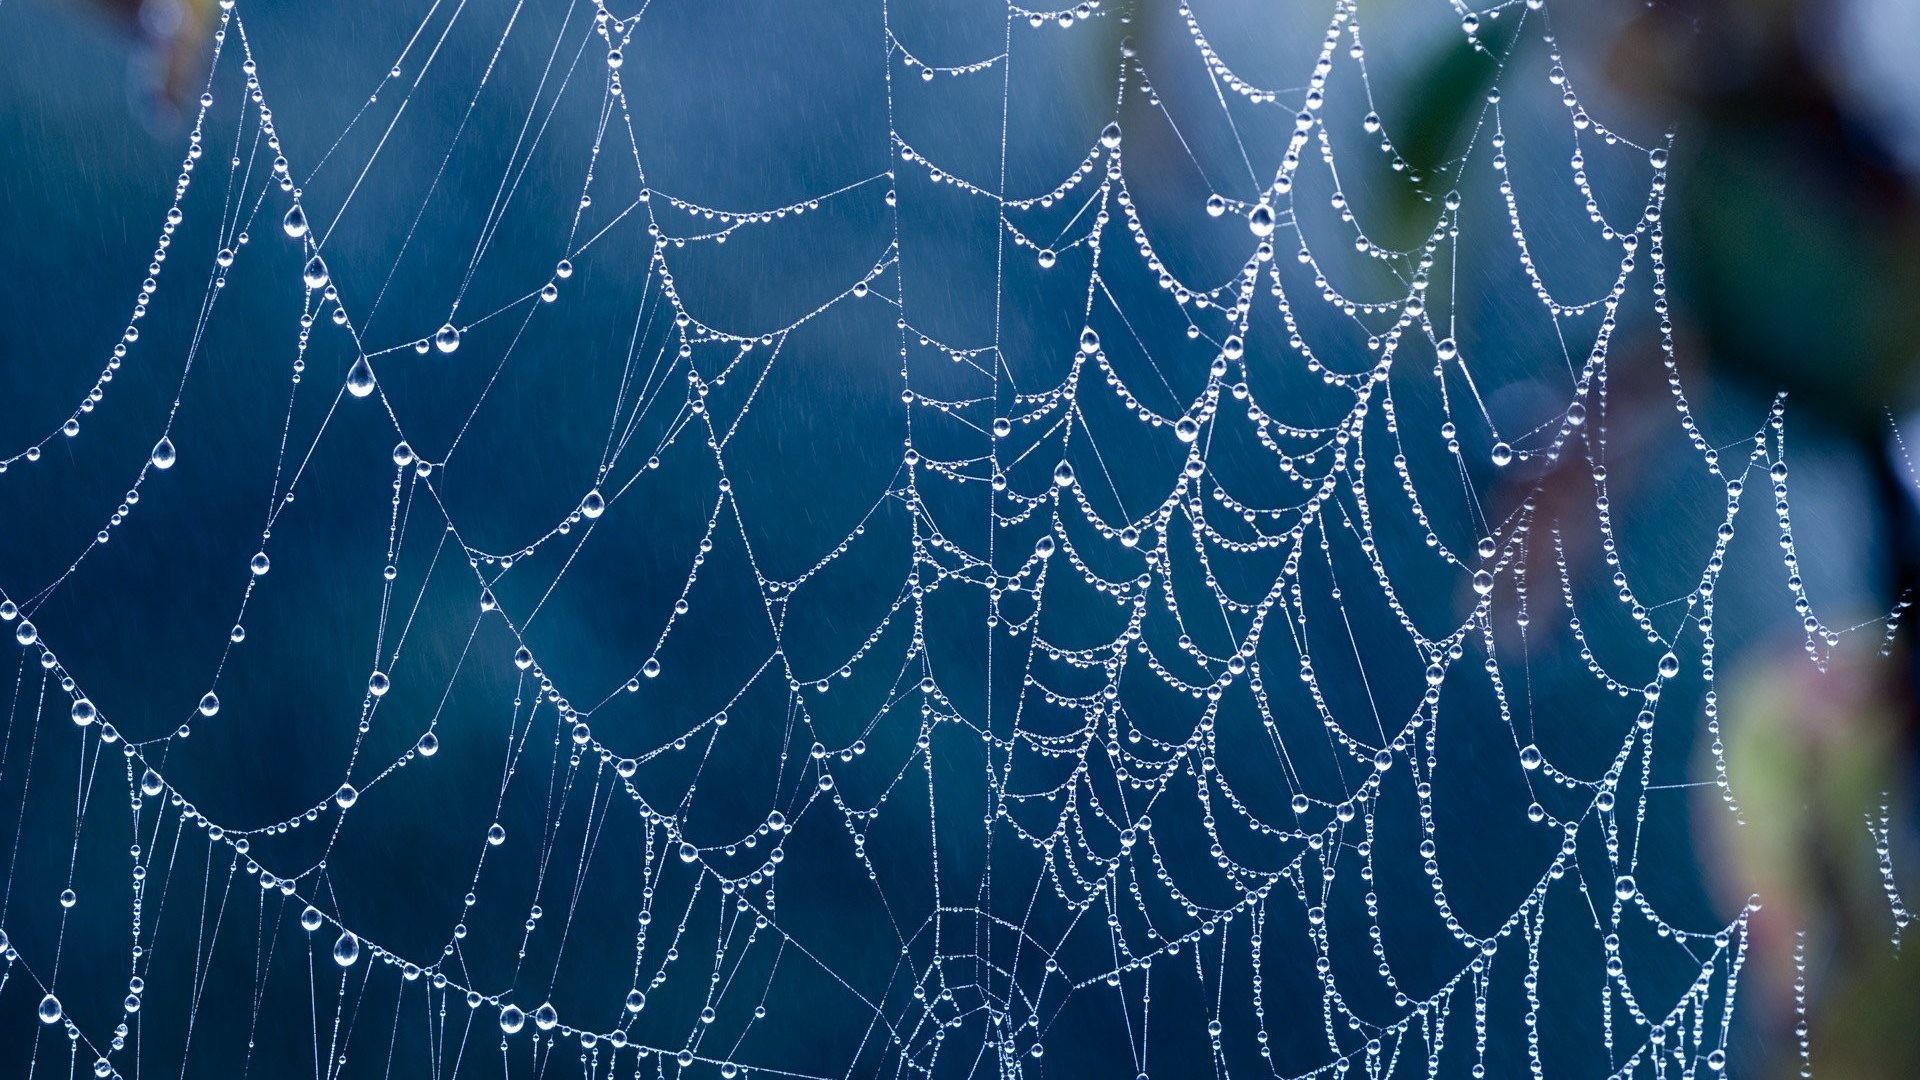 Webs Tag – Creepy Spider Webs Hd Full Size Nature Wallpaper for HD 16:9